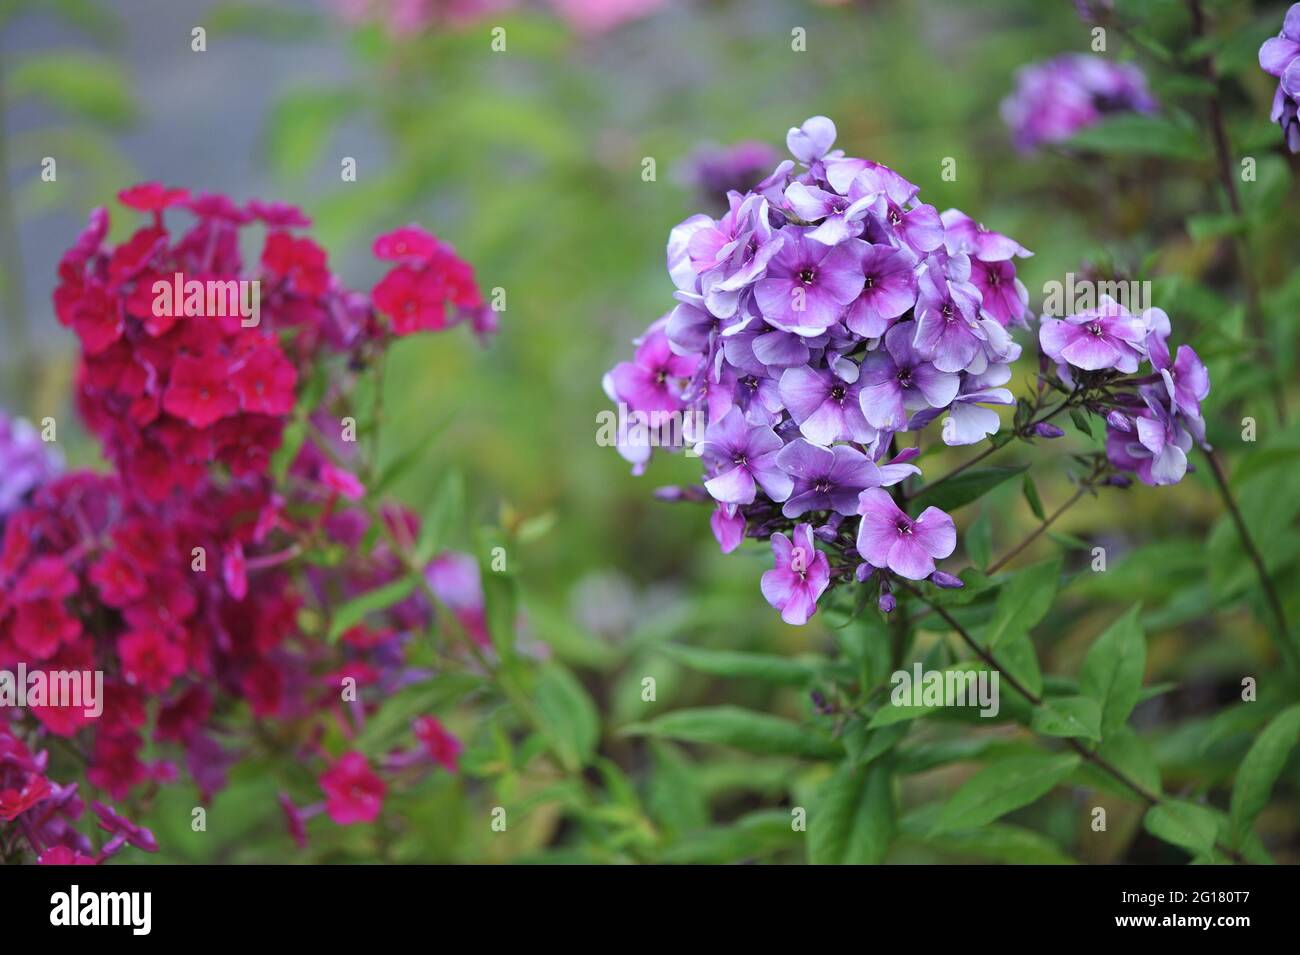 Violet-blue phlox paniculata Alexey Lensky blooms in a garden in July Stock Photo